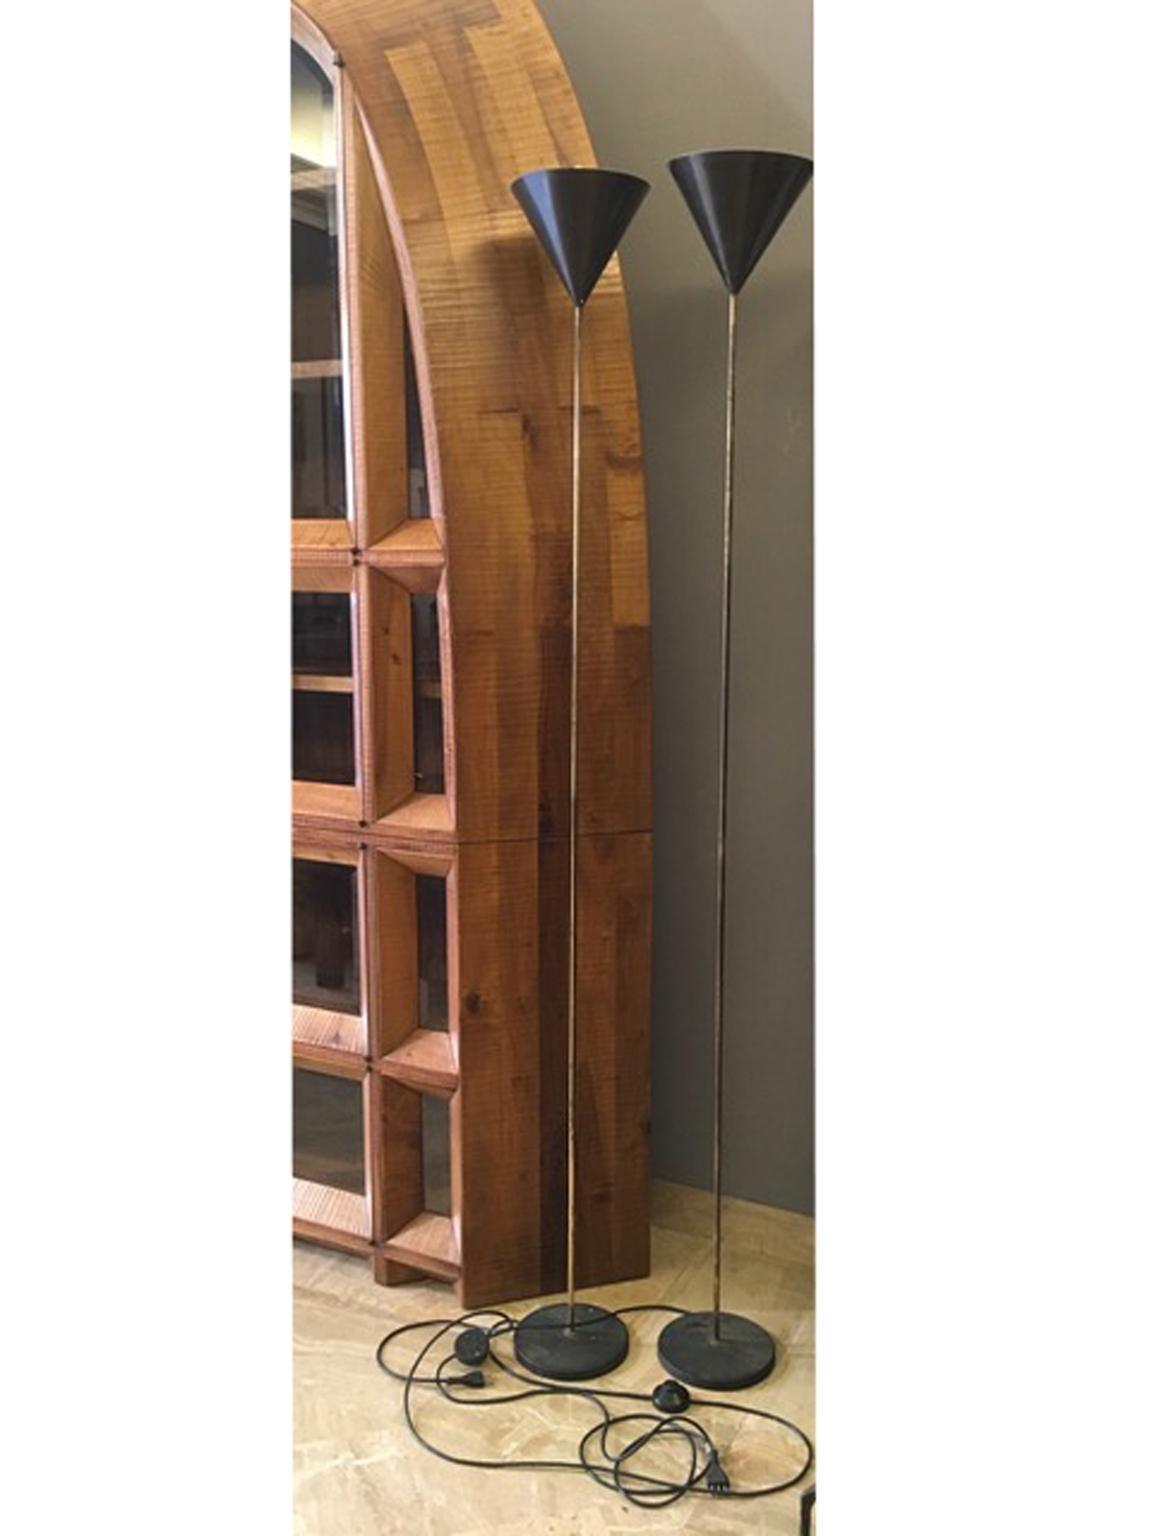 This is an original product of Azucena workshop designed by Luigi Caccia Dominioni, made in Italy in 1950 circa.This floor lamp has  the signs of the time but the beauty never change.
One masterpiece of the Italian modern design history to